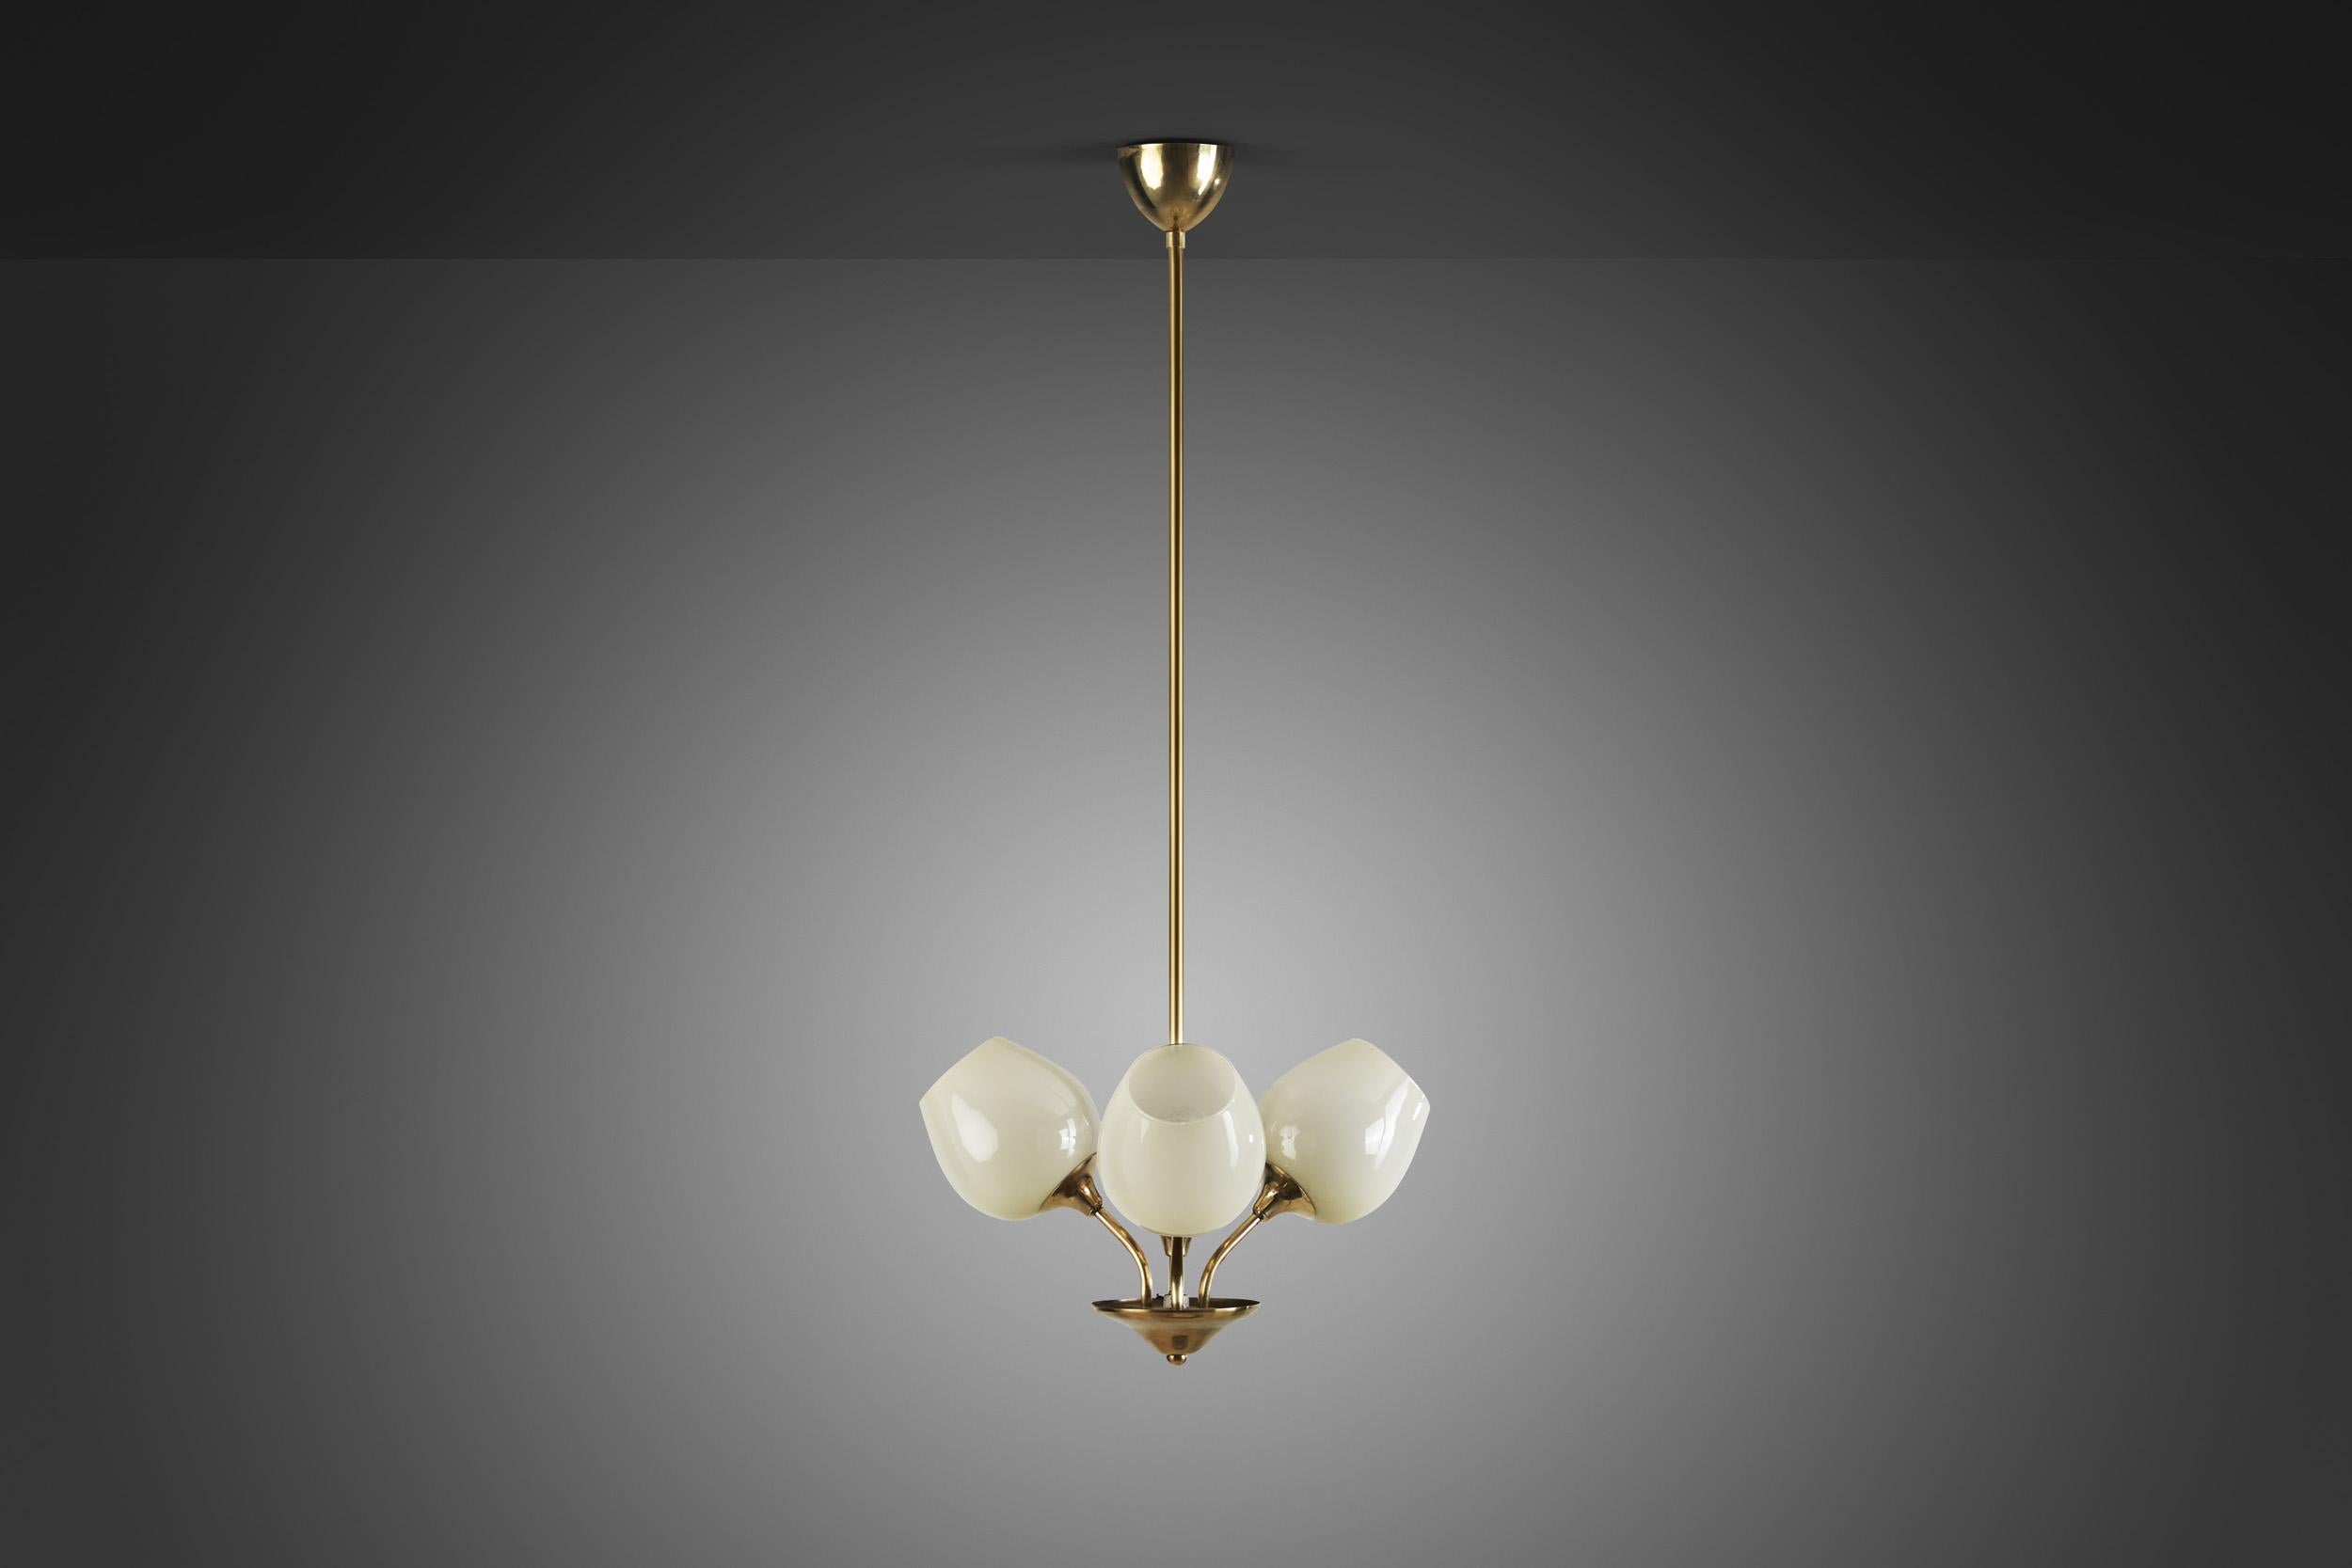 Brass Ceiling Lamp with Opal Shades by Itsu 'Attr.', Finland, ca 1950s For Sale 1